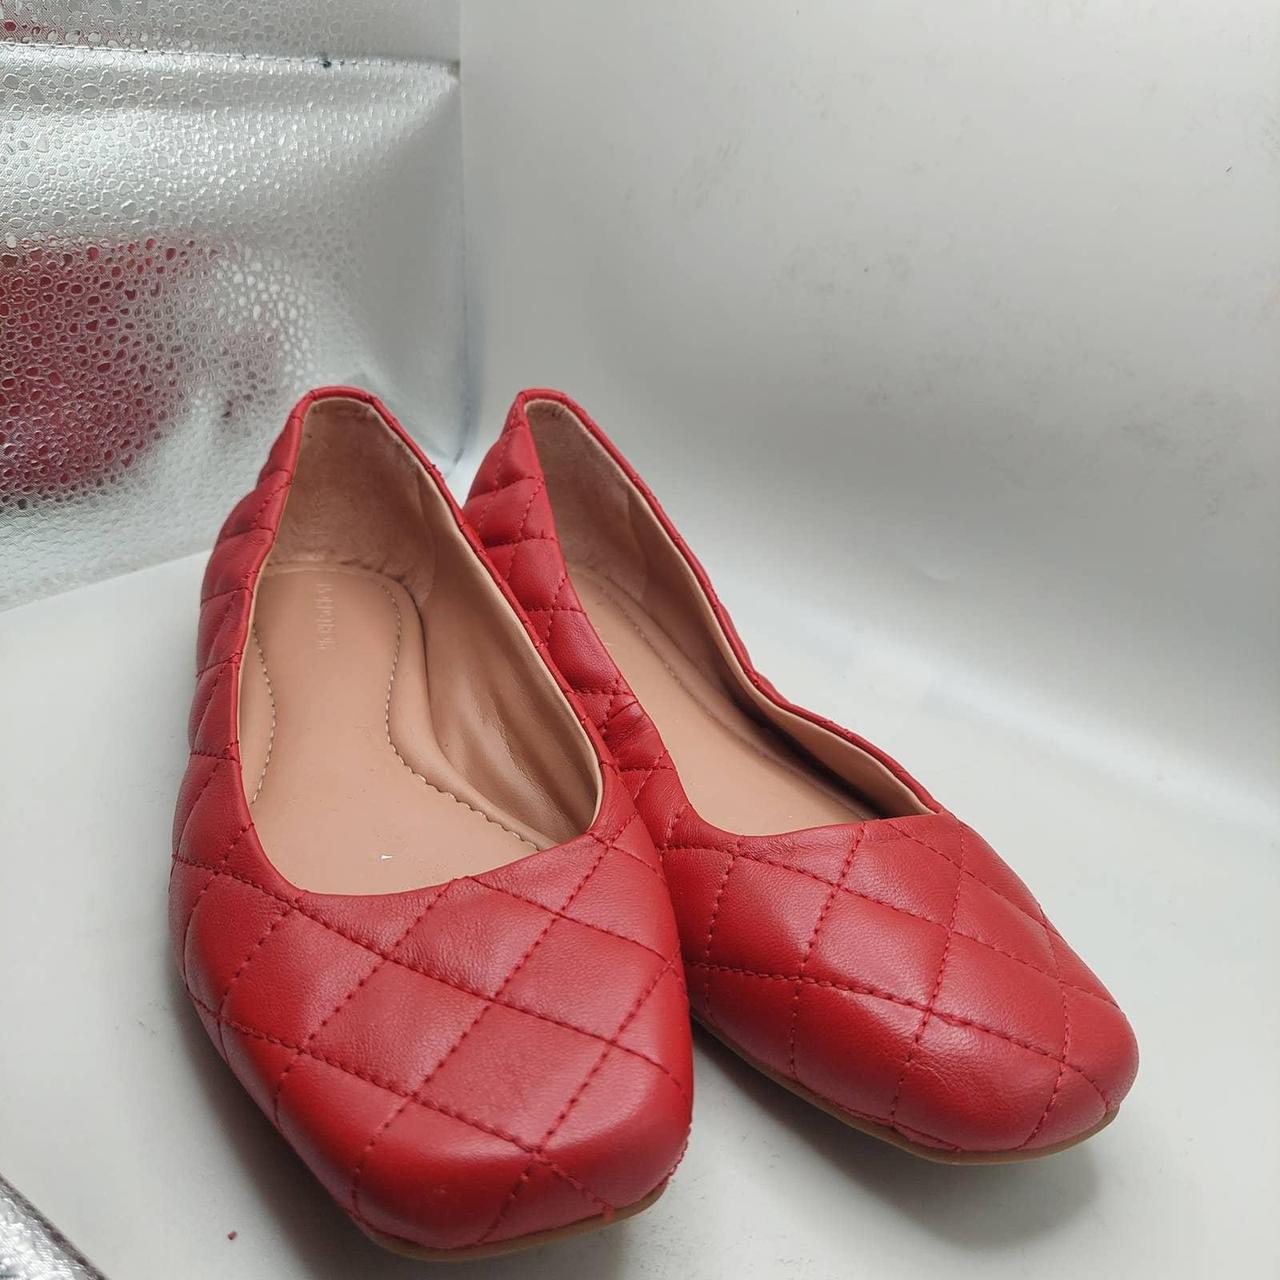 Title:Nordstrom Red Faux Leather Flats Women's 6 - Depop